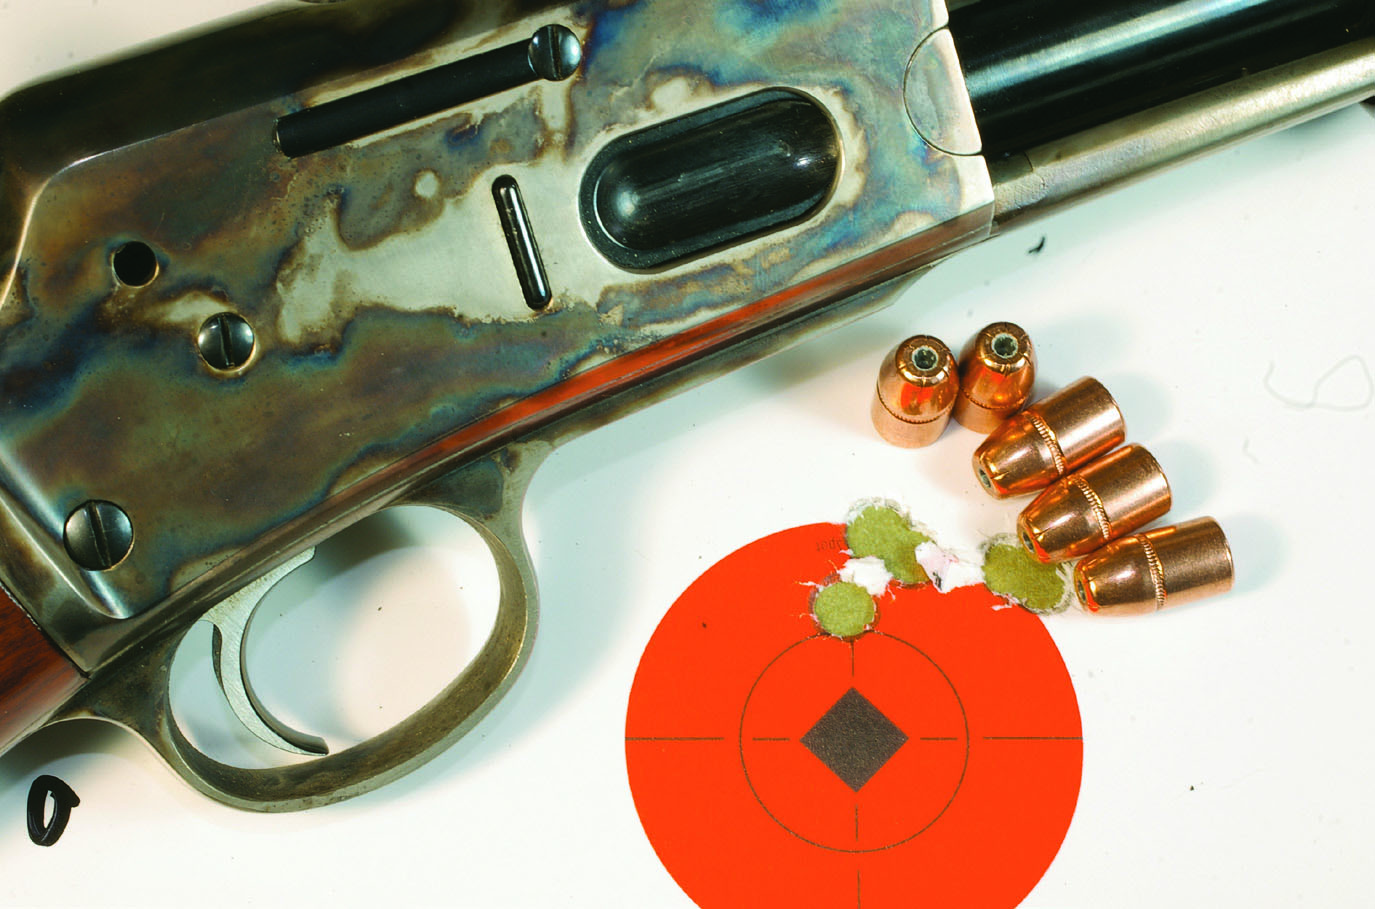 This group was shot with a Uberti .357 Magnum rifle shooting Hornady 158-grain FP-XTP bullets.